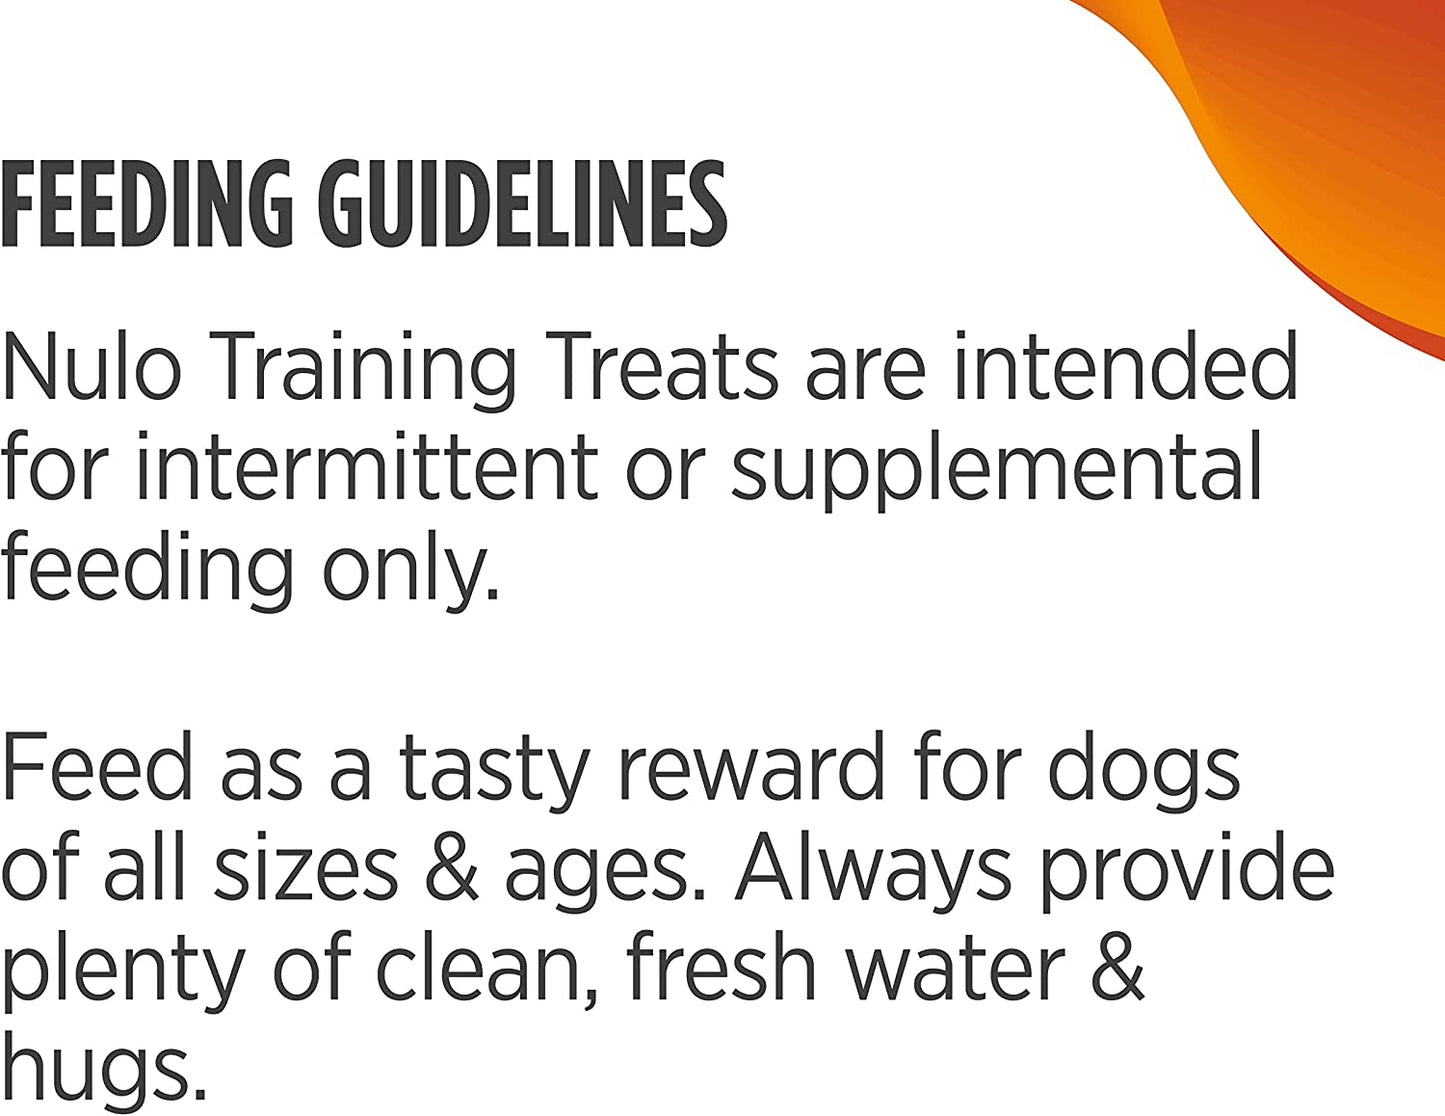 Nulo Freestyle Grain-Free Healthy Dog and Puppy Training Treats, Low Calorie Treats Made with Superfood Boost Ingredients, 2 Calories per Treat